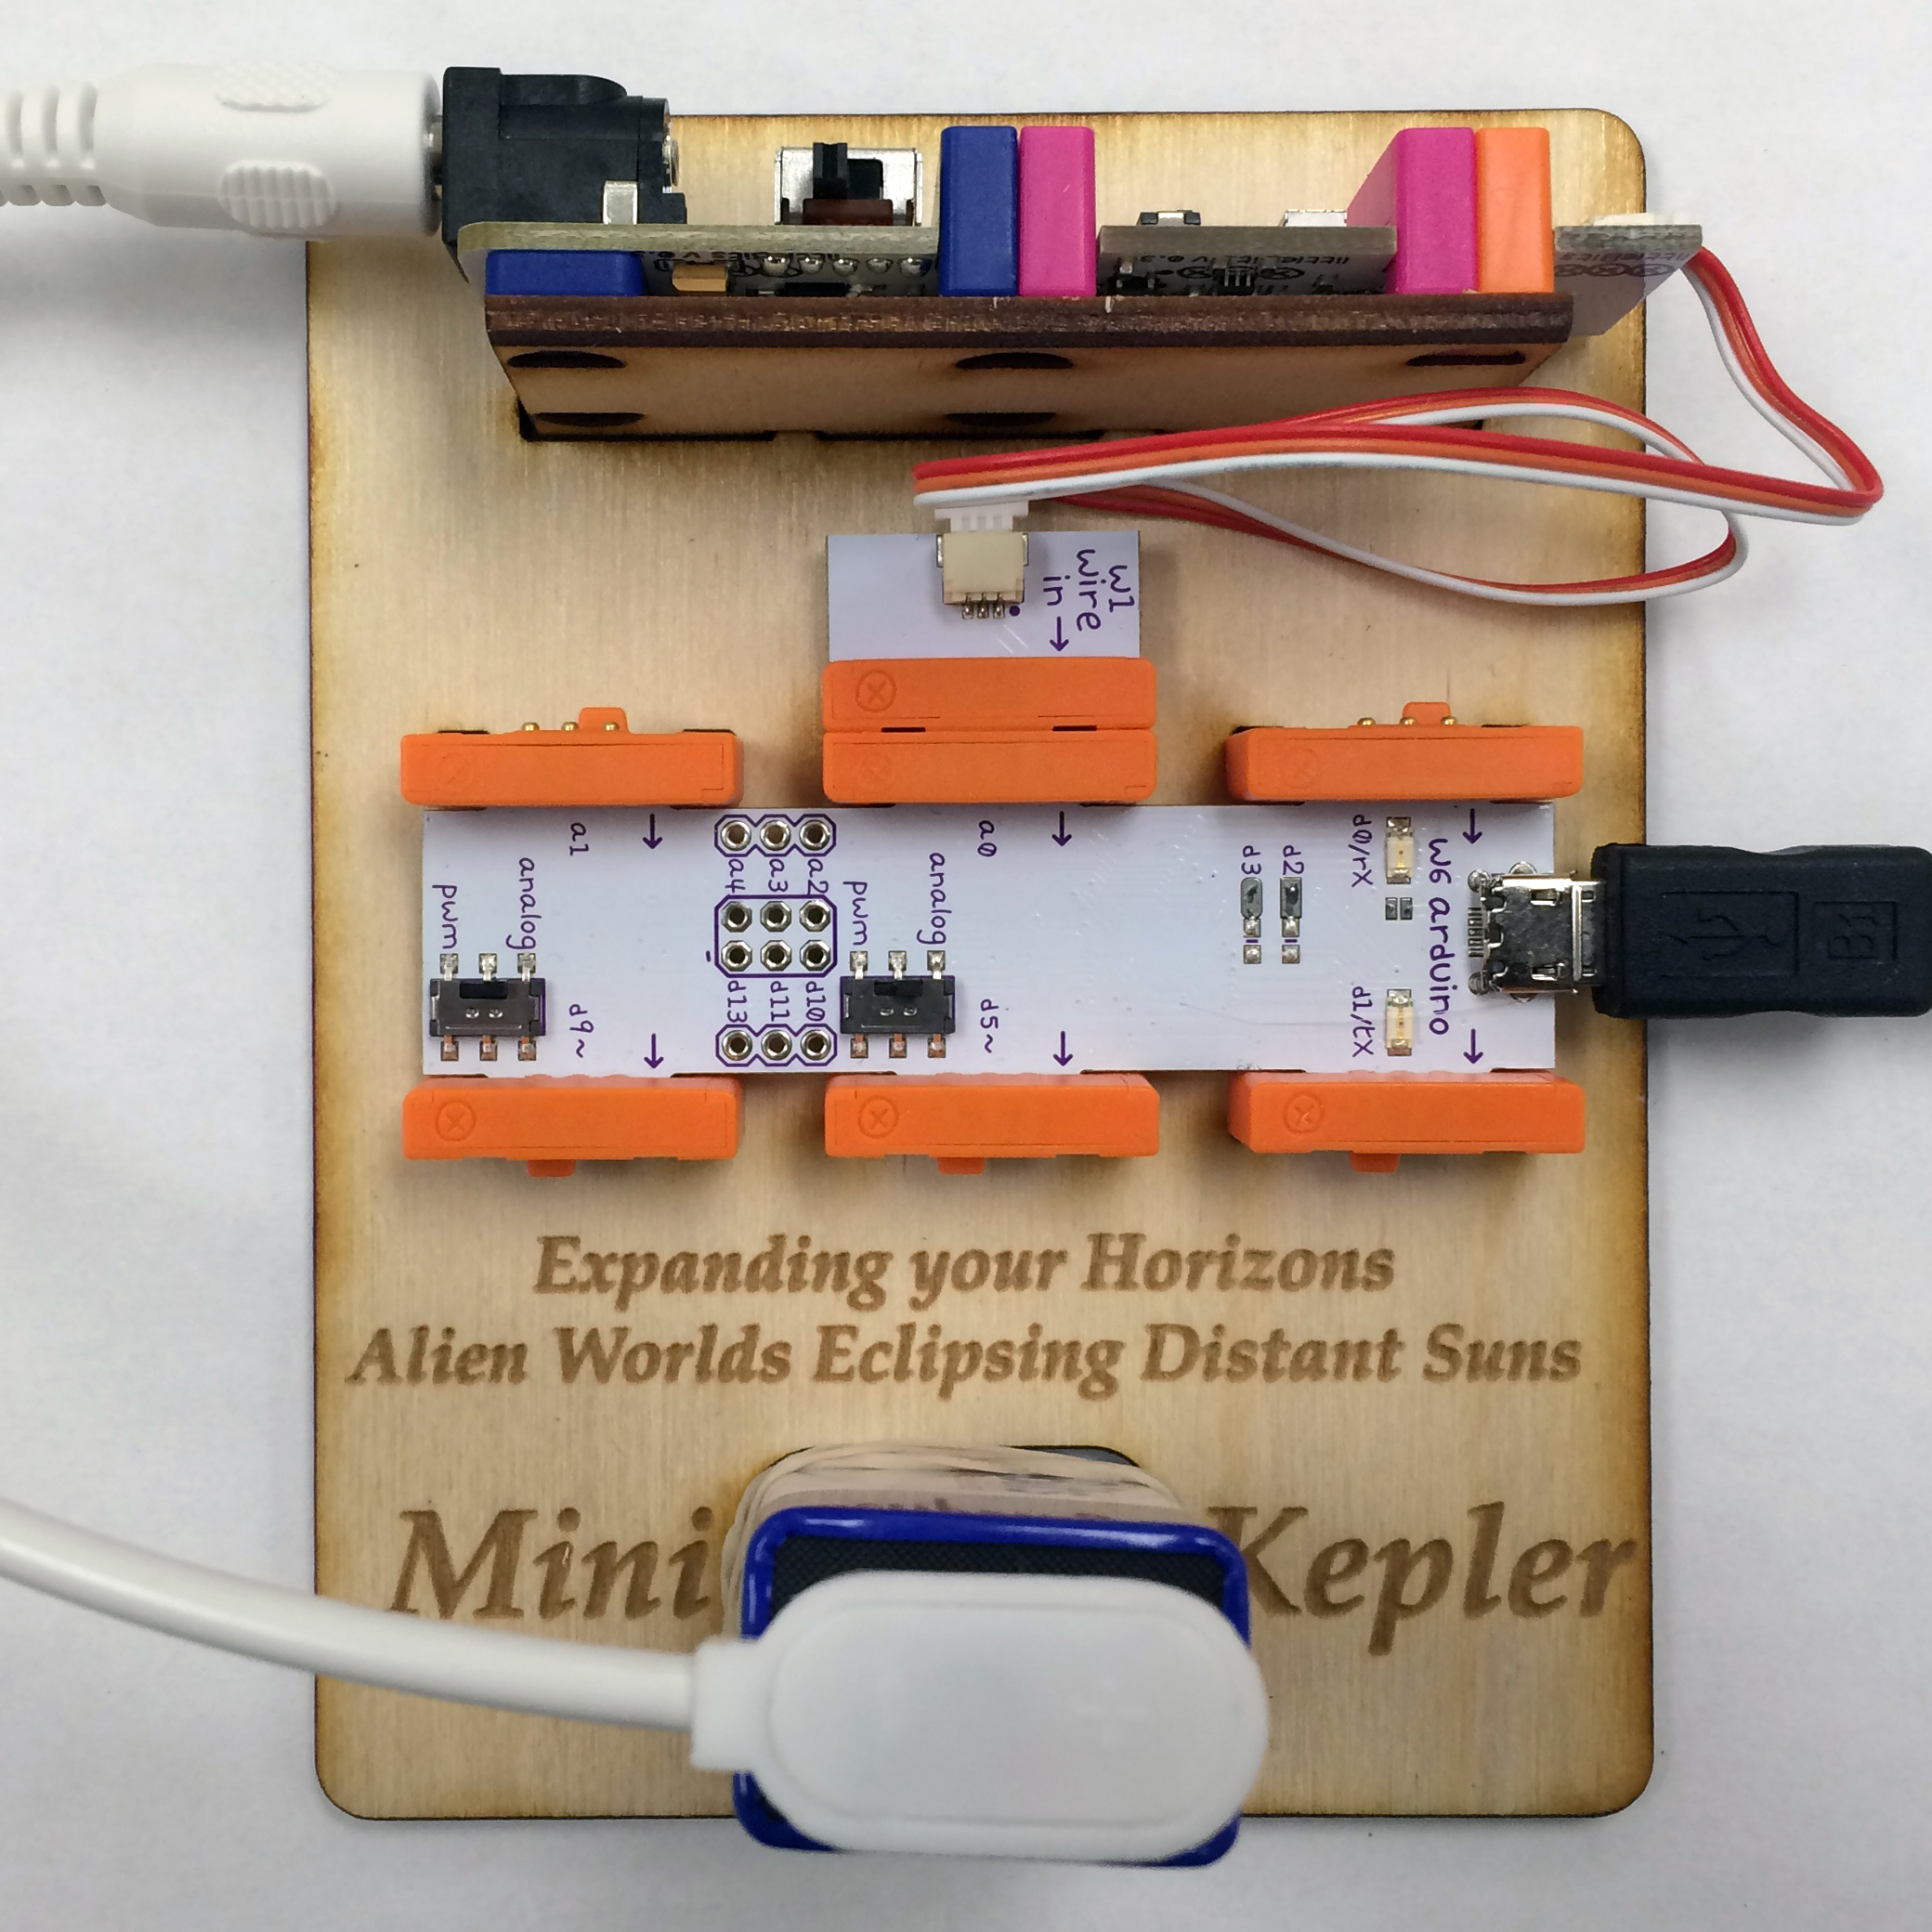 A photo of a mini-Kepler assembled from the littleBits snap together electronic components